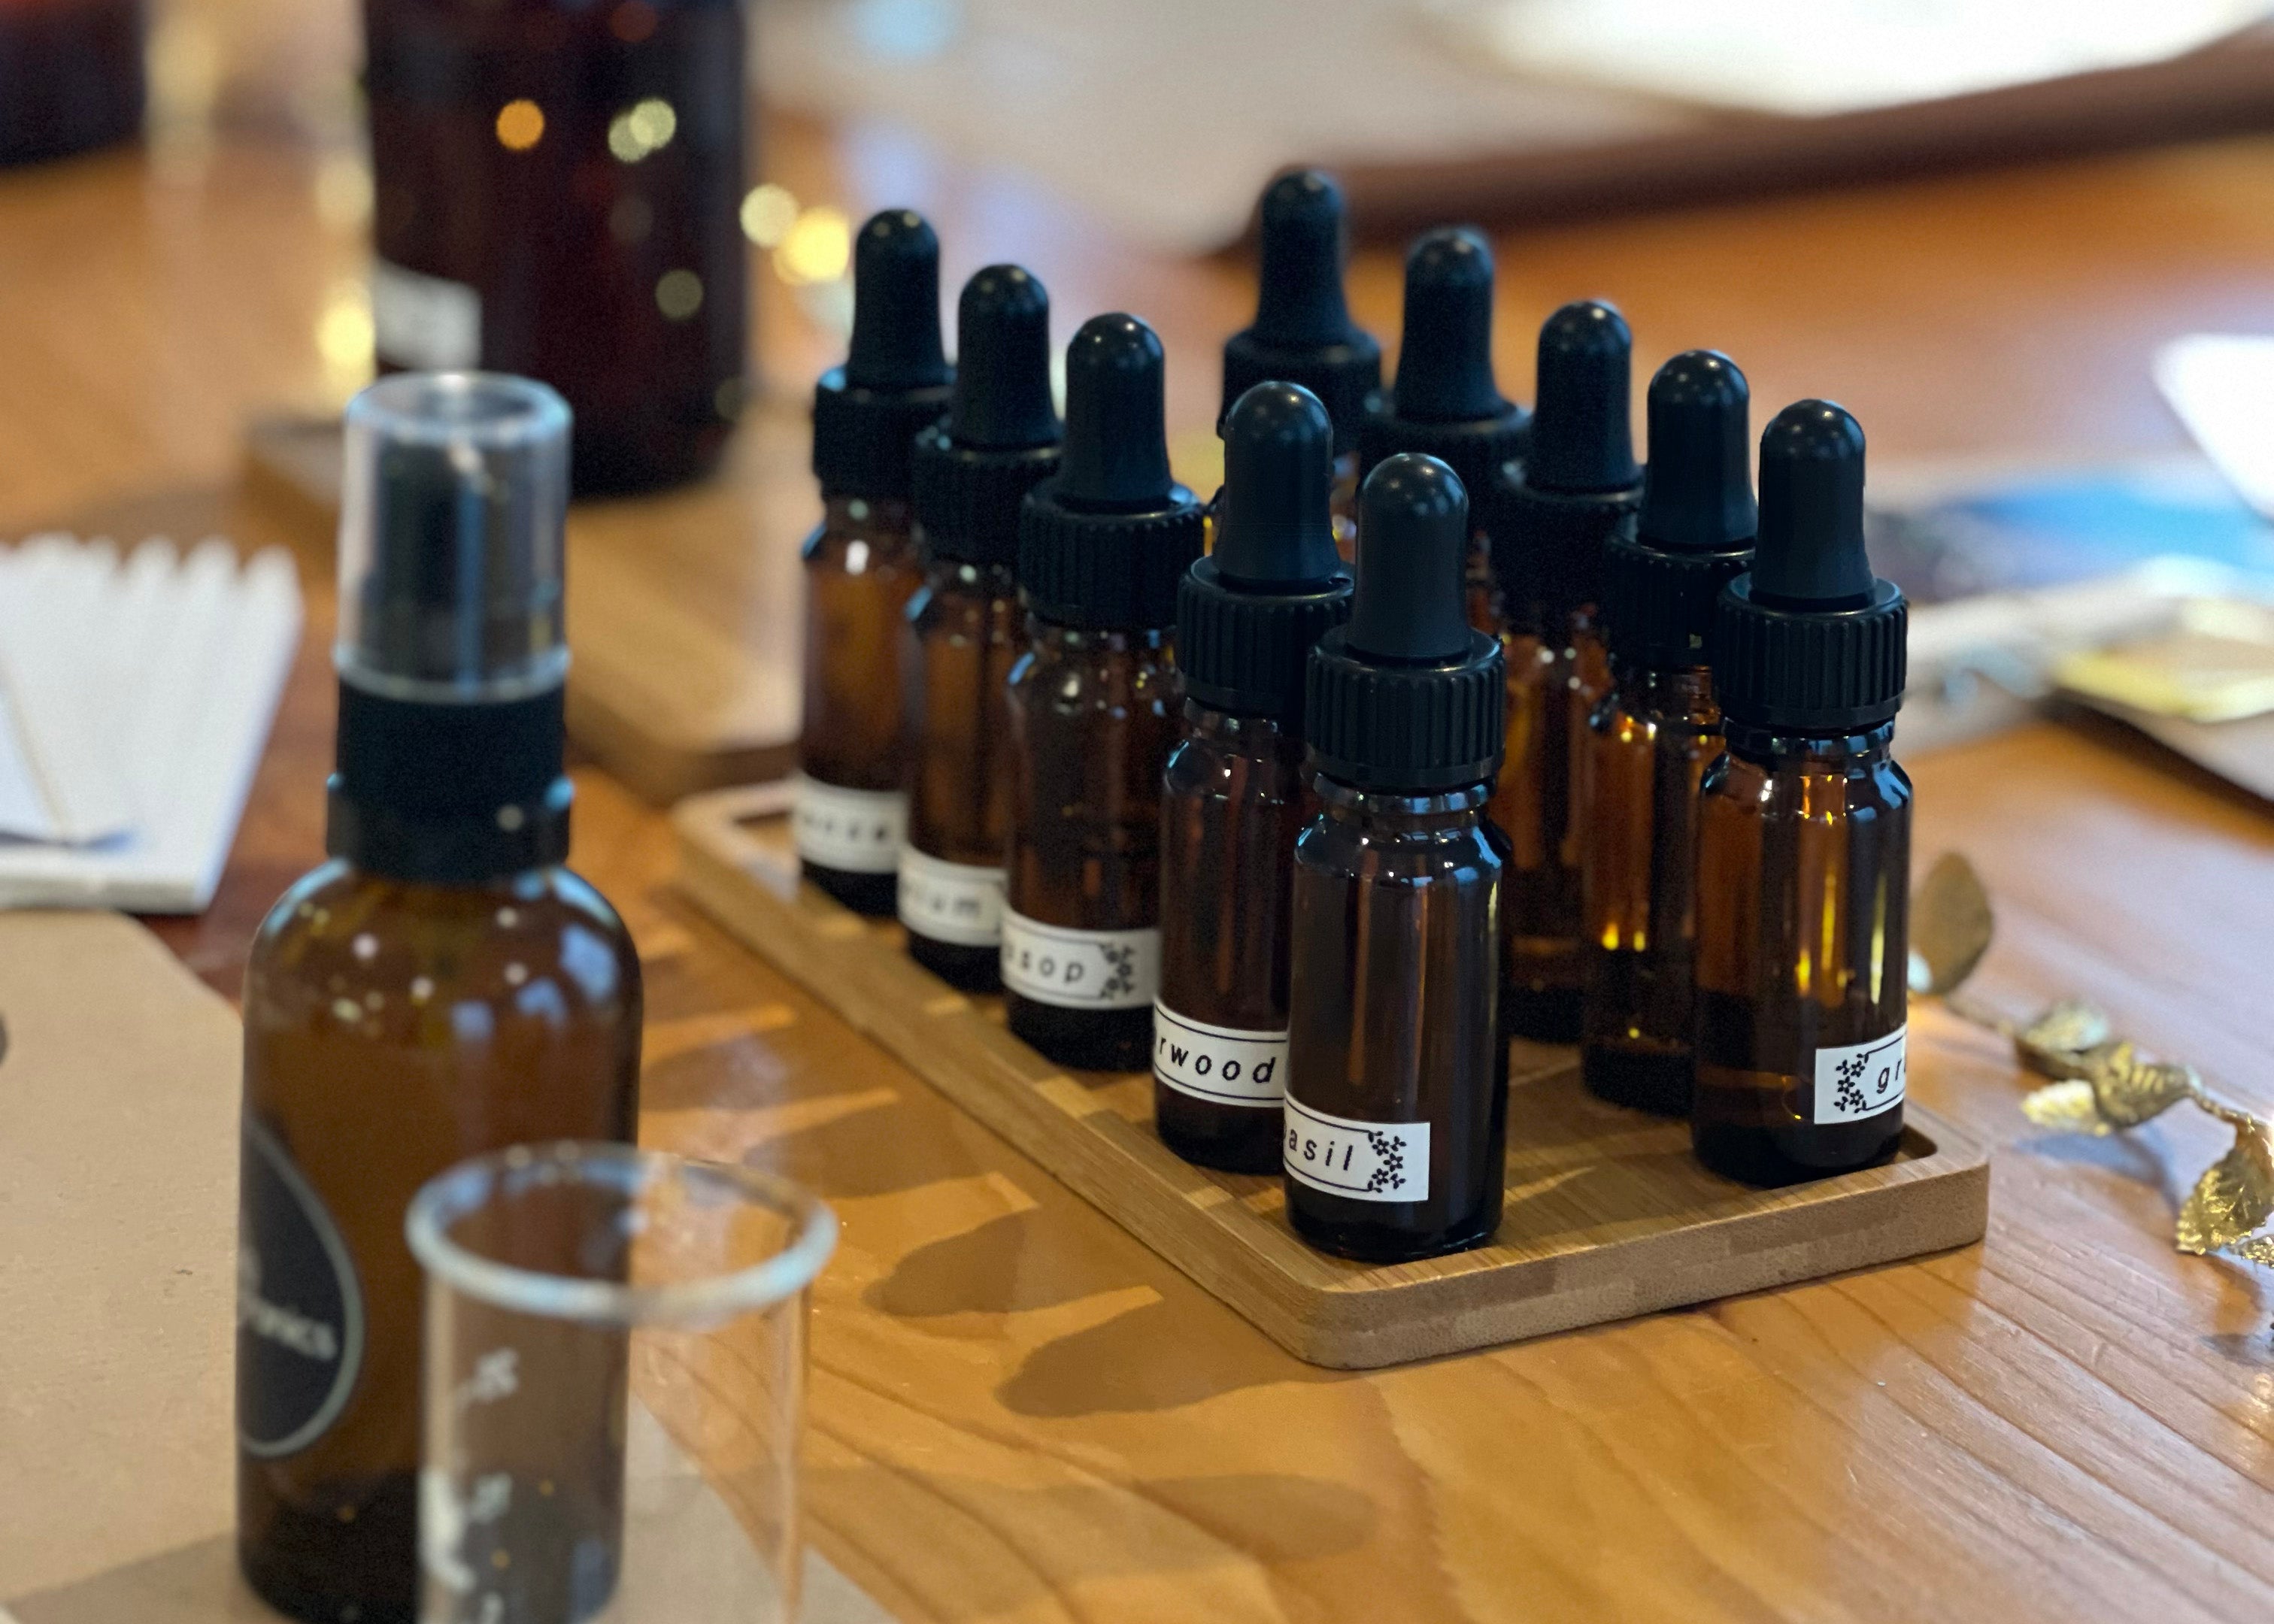 A collection of amber glass bottles with droppers, labeled with various scents such as 'cedarwood' and 'basil', are neatly arranged on a wooden tray. In the foreground, a brown glass spray bottle and a clear measuring cup are visible, suggesting a workshop setting for creating custom scents or aromatherapy blends